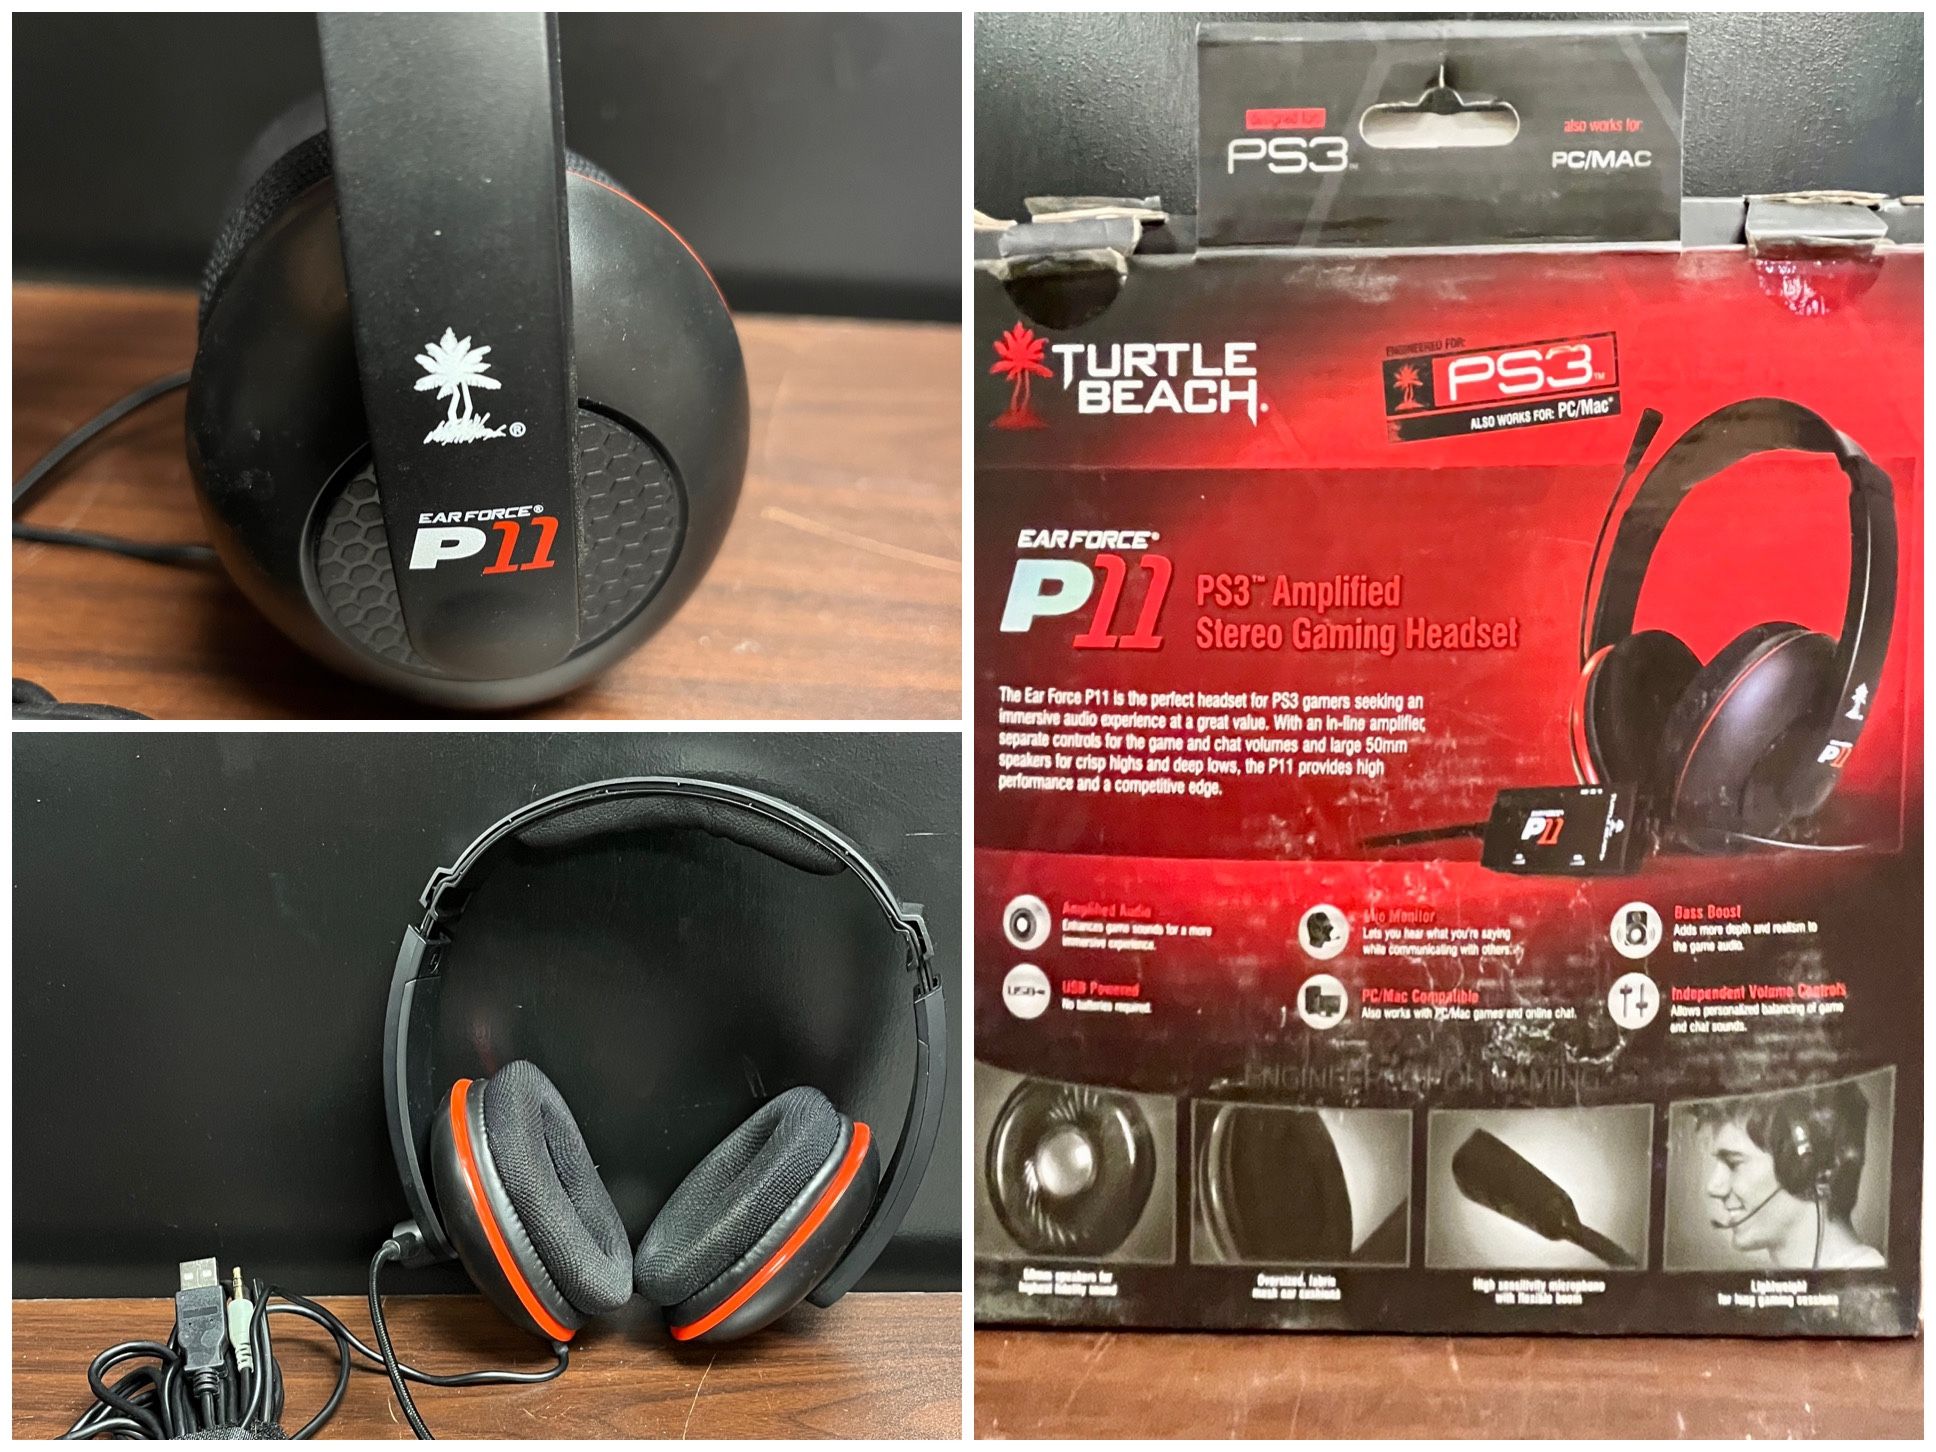 Turtle Beach - Ear Force P11 - Amplified Stereo Gaming Headset PS4, PS3, PC, Mac